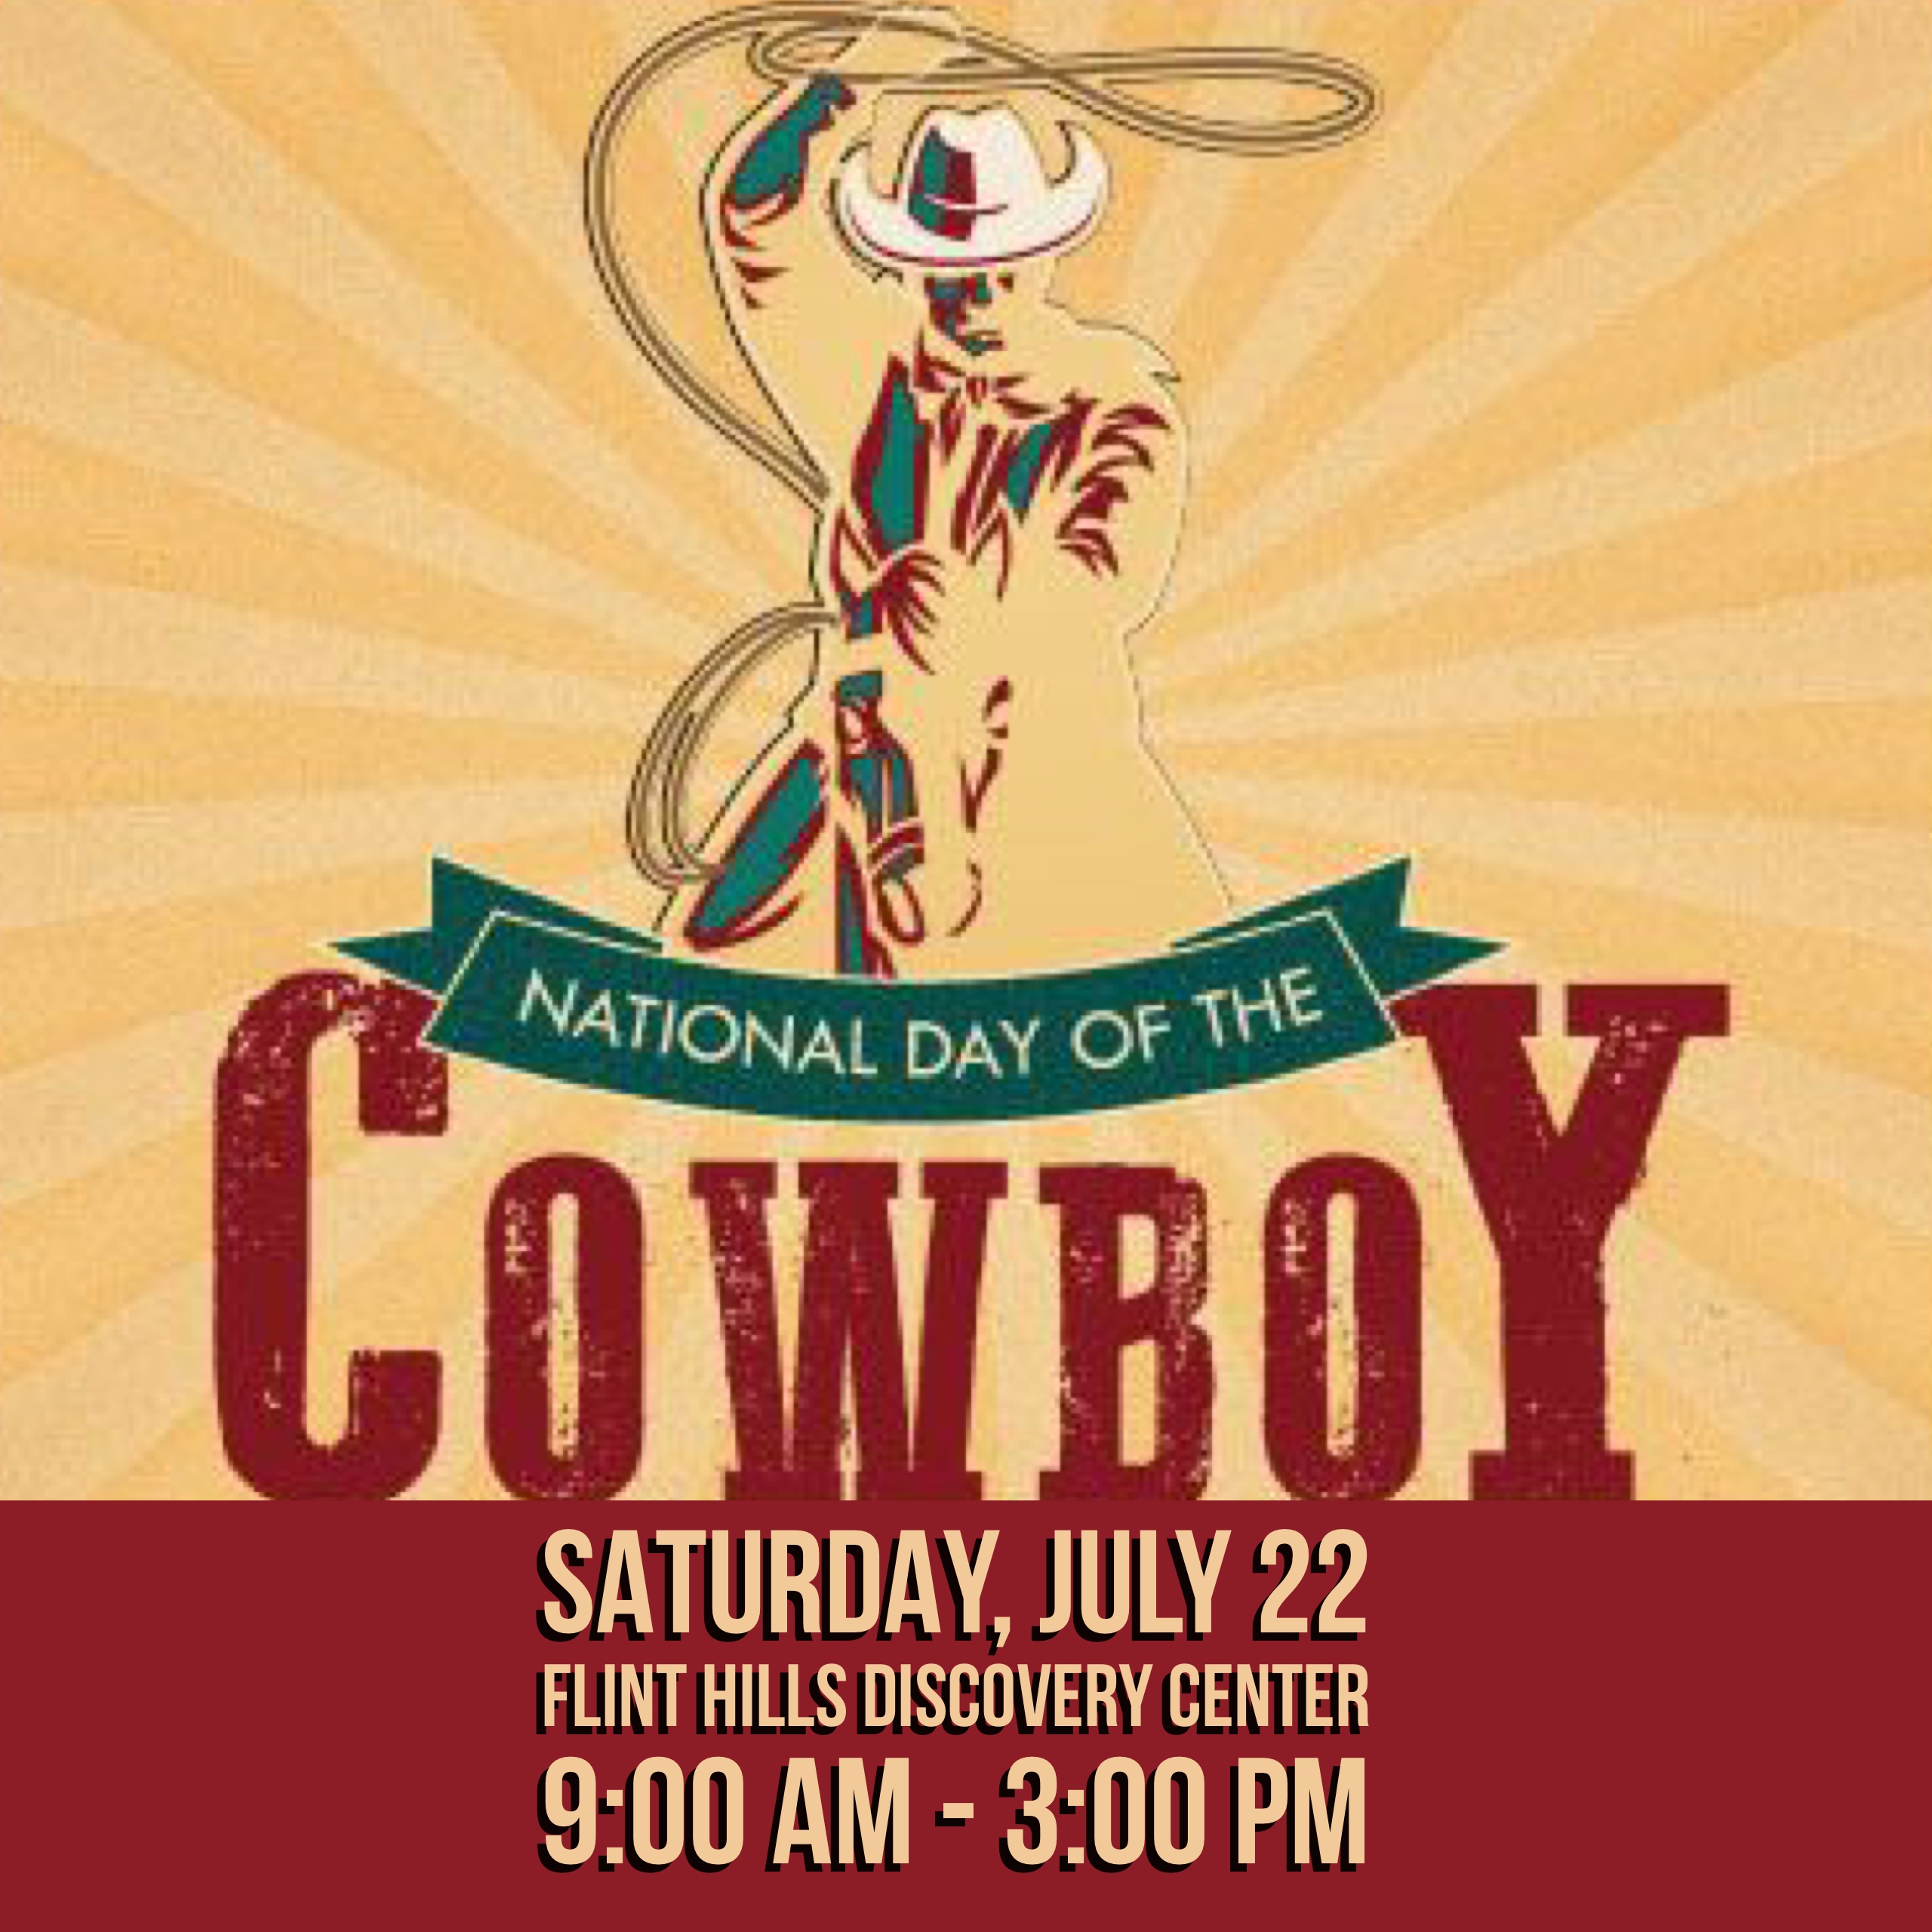 National Day of the Cowboy Downtown Manhattan Inc.